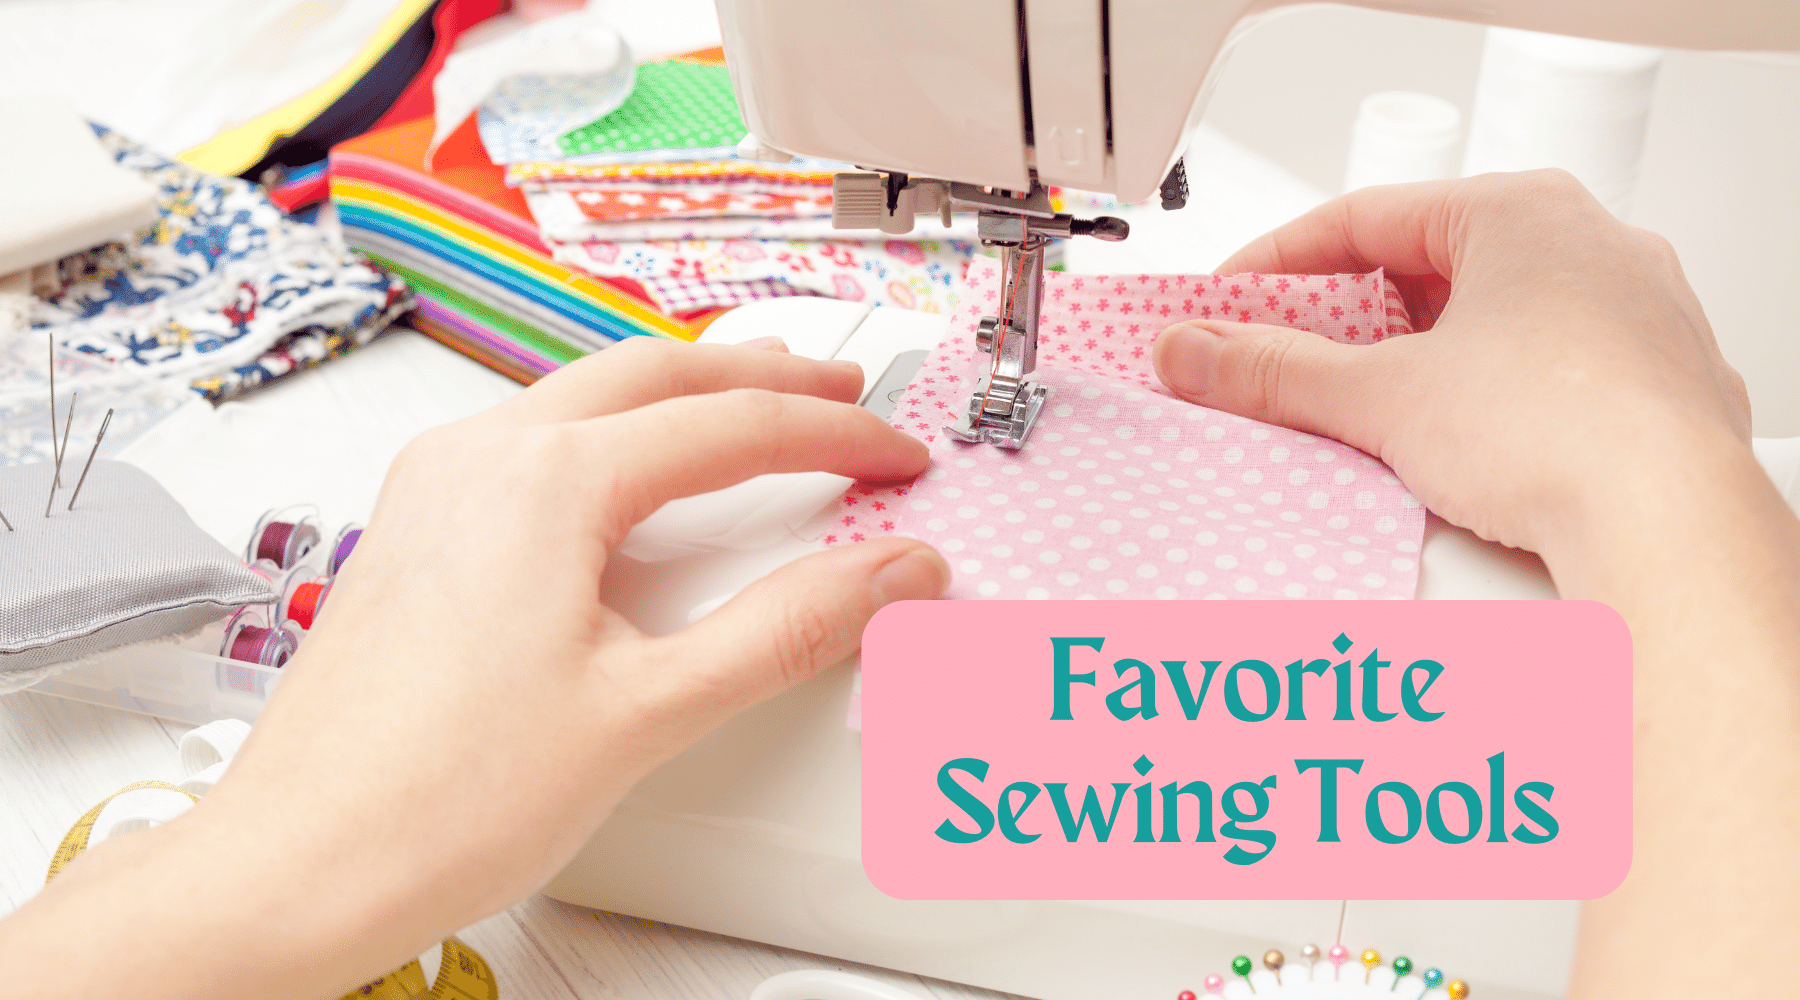 Discover favorite sewing tools that will make sewing and quilting even more amazing.